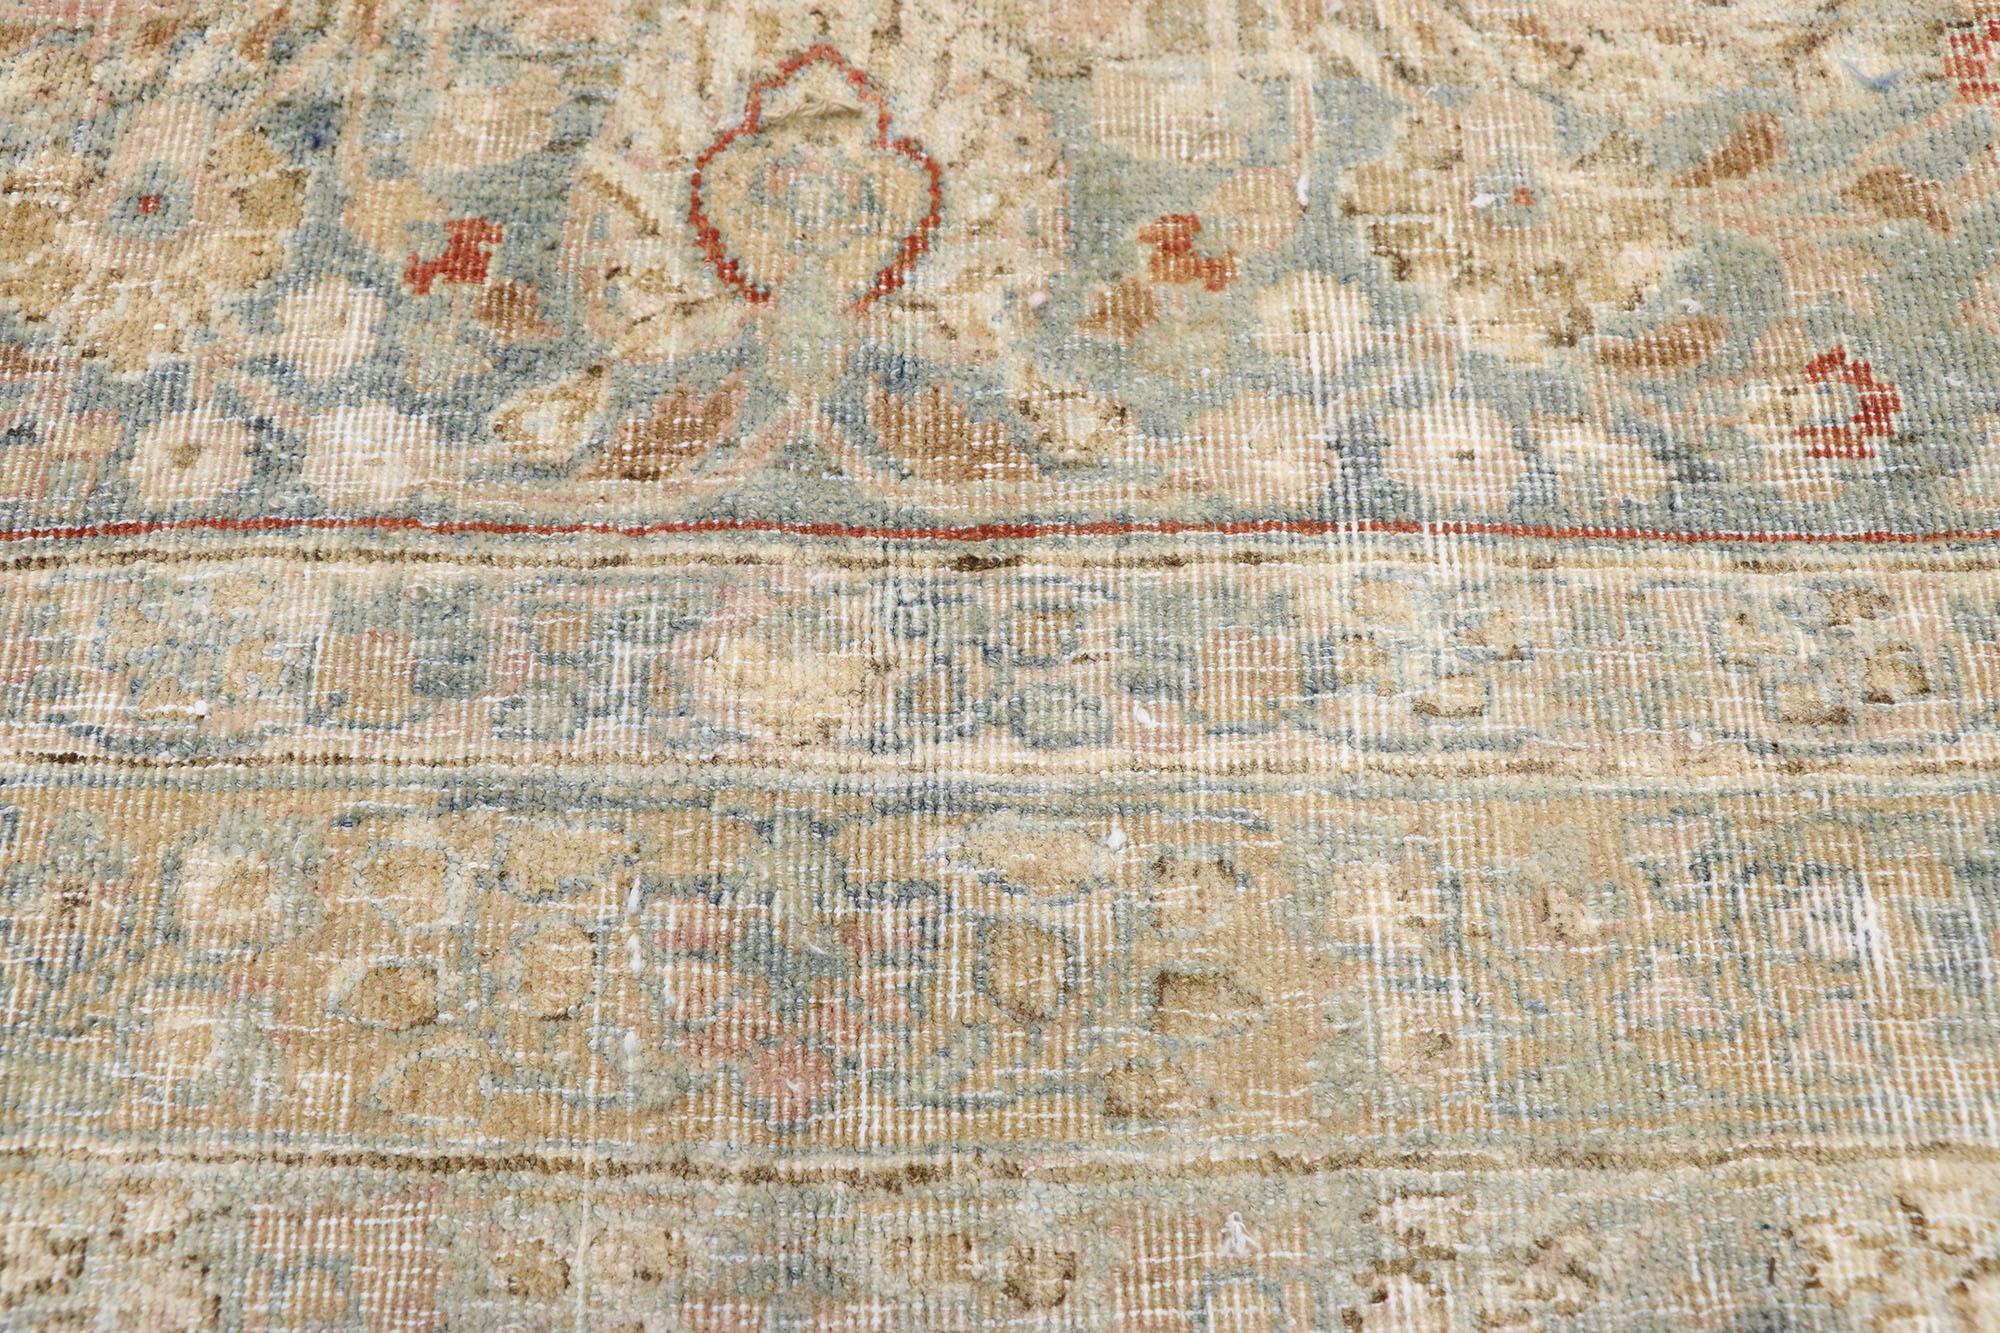 Hand-Knotted Distressed Antique Persian Khorassan Design Rug with Rustic English Manor Style